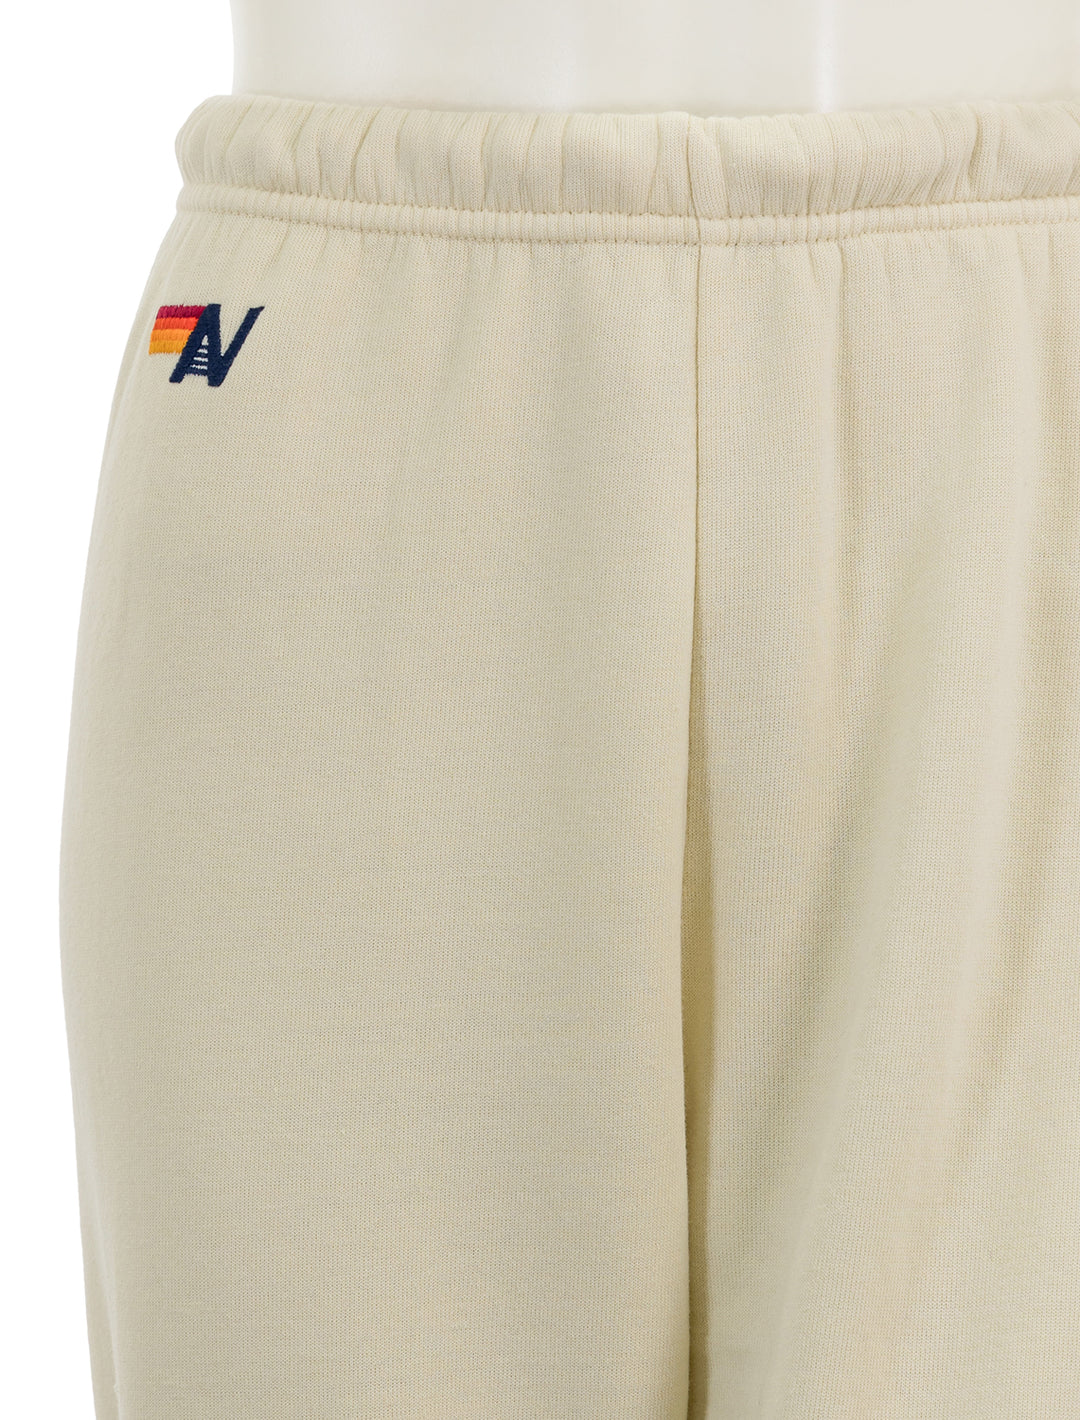 Close-up view of Aviator Nation's 5 stripe womens sweatpants in vintage white.